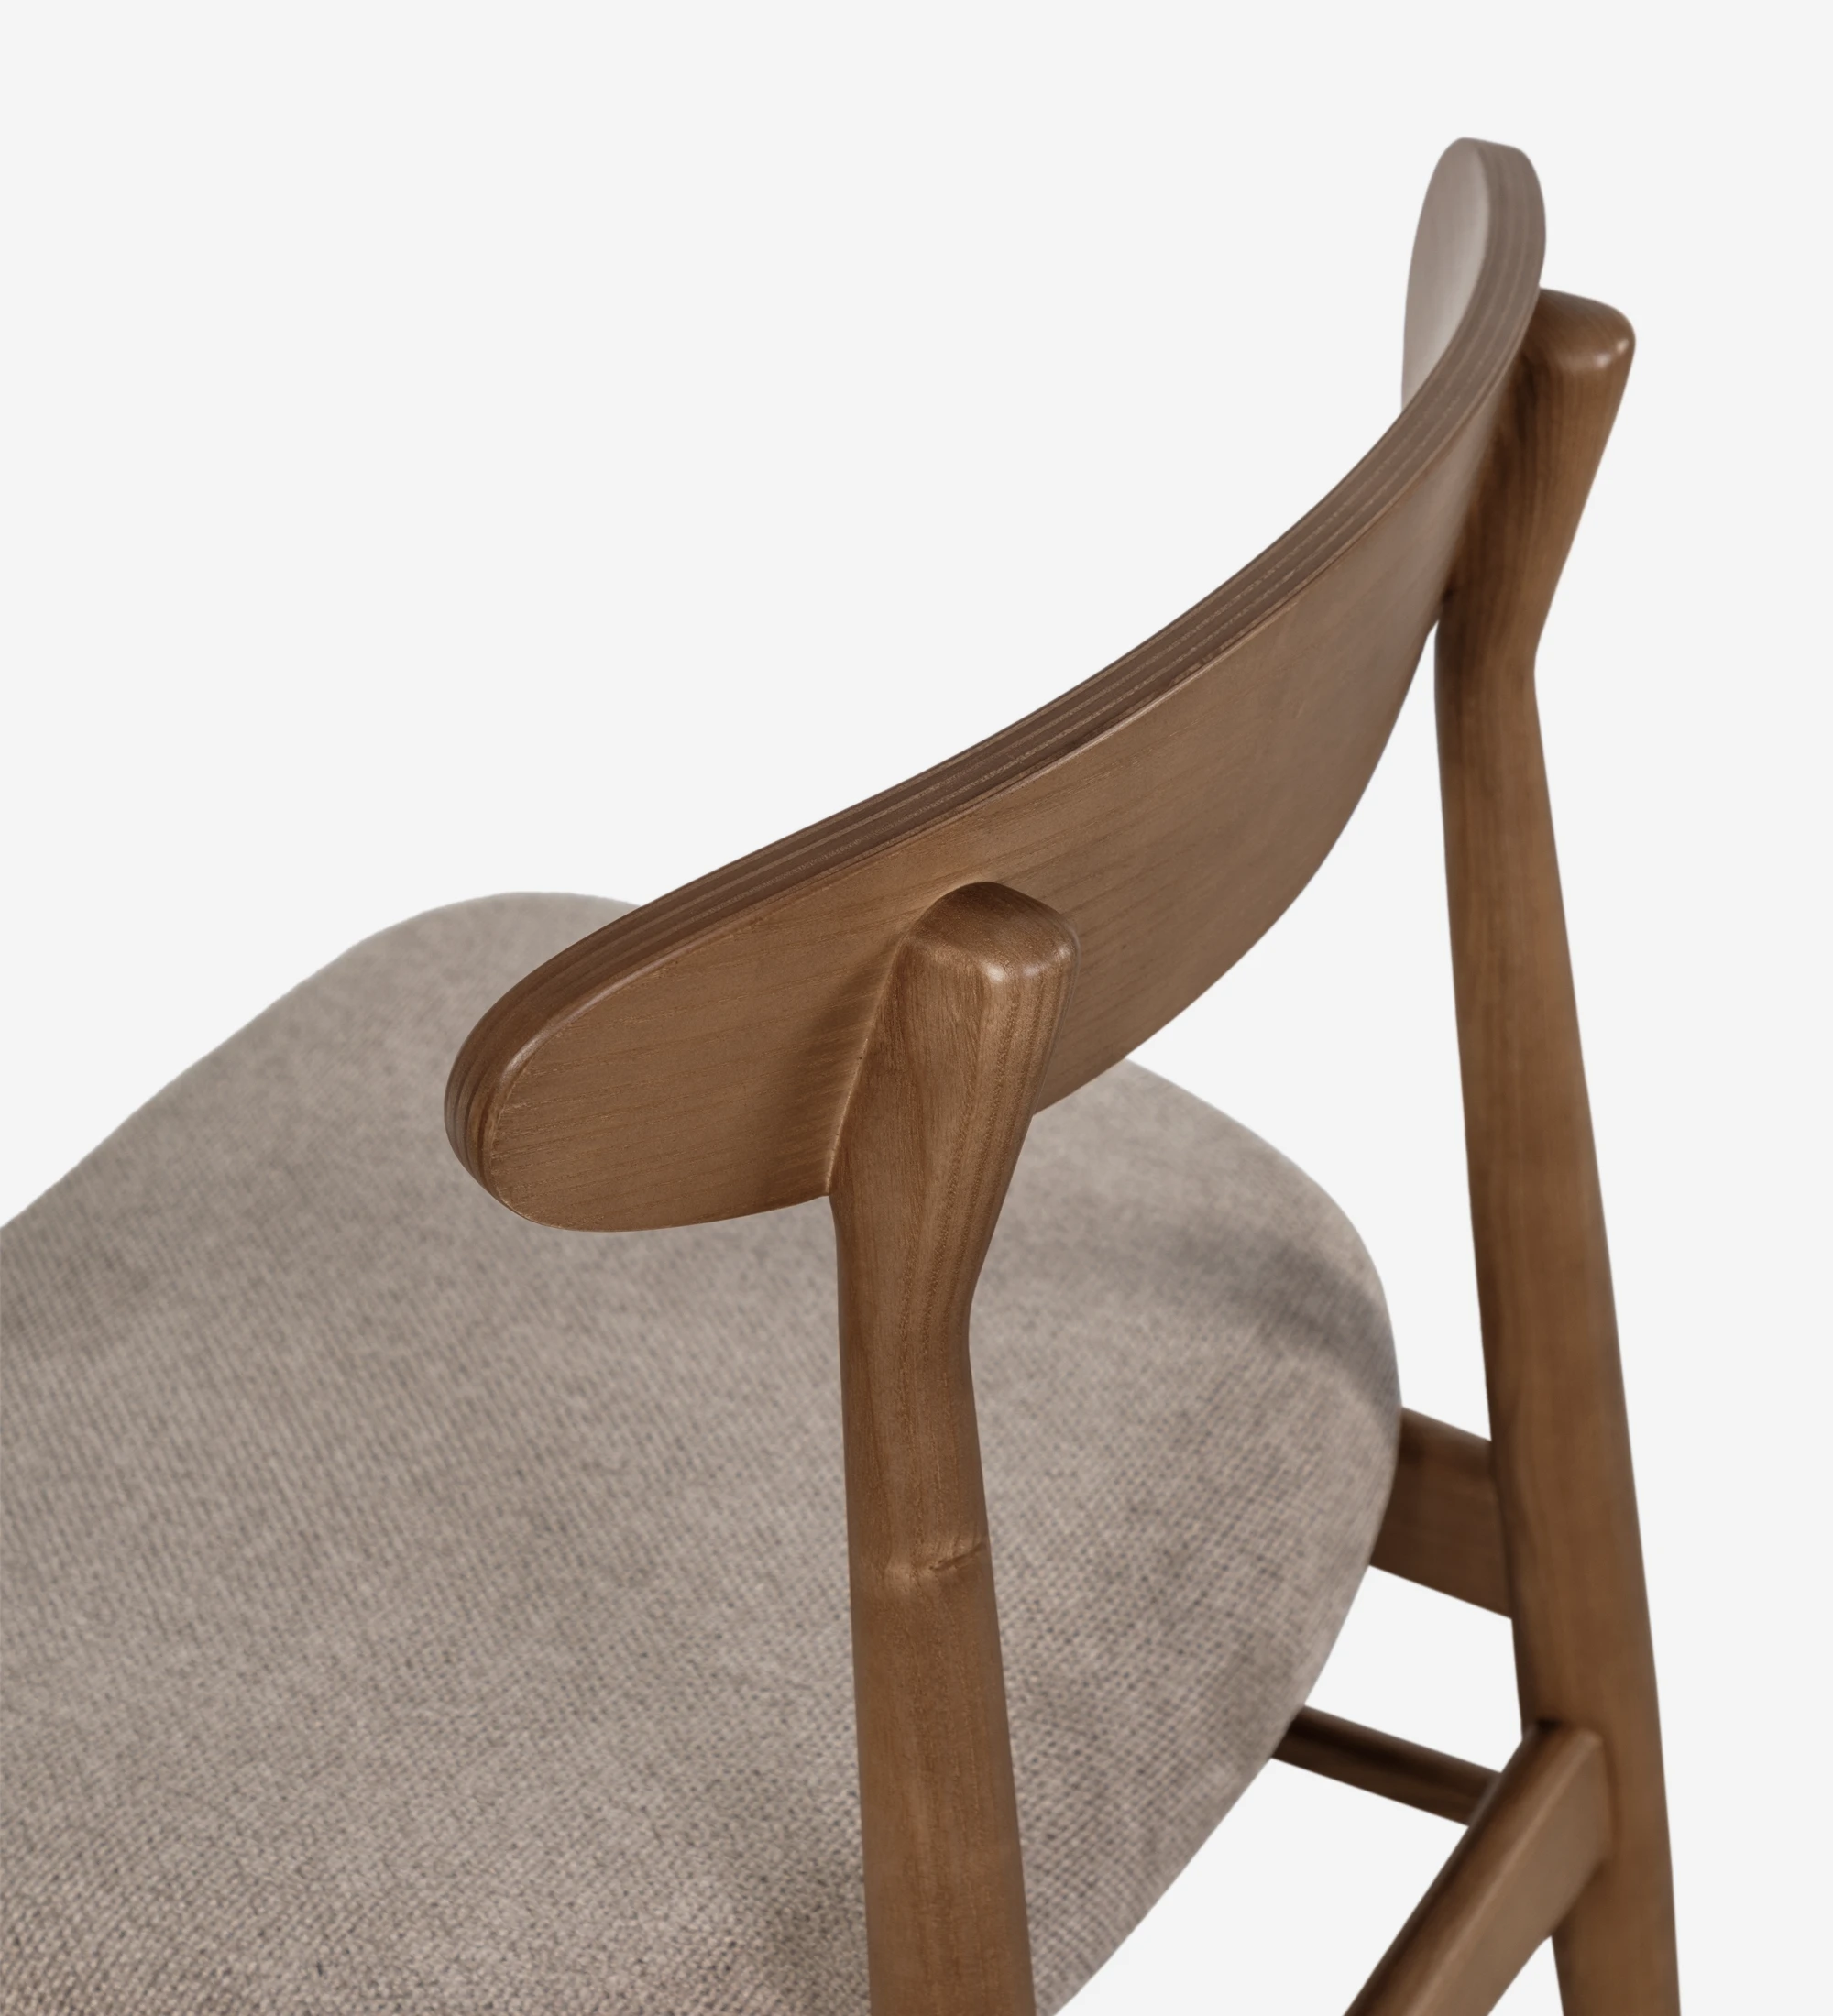 Chair with walnut wood structure and fabric upholstered seat.